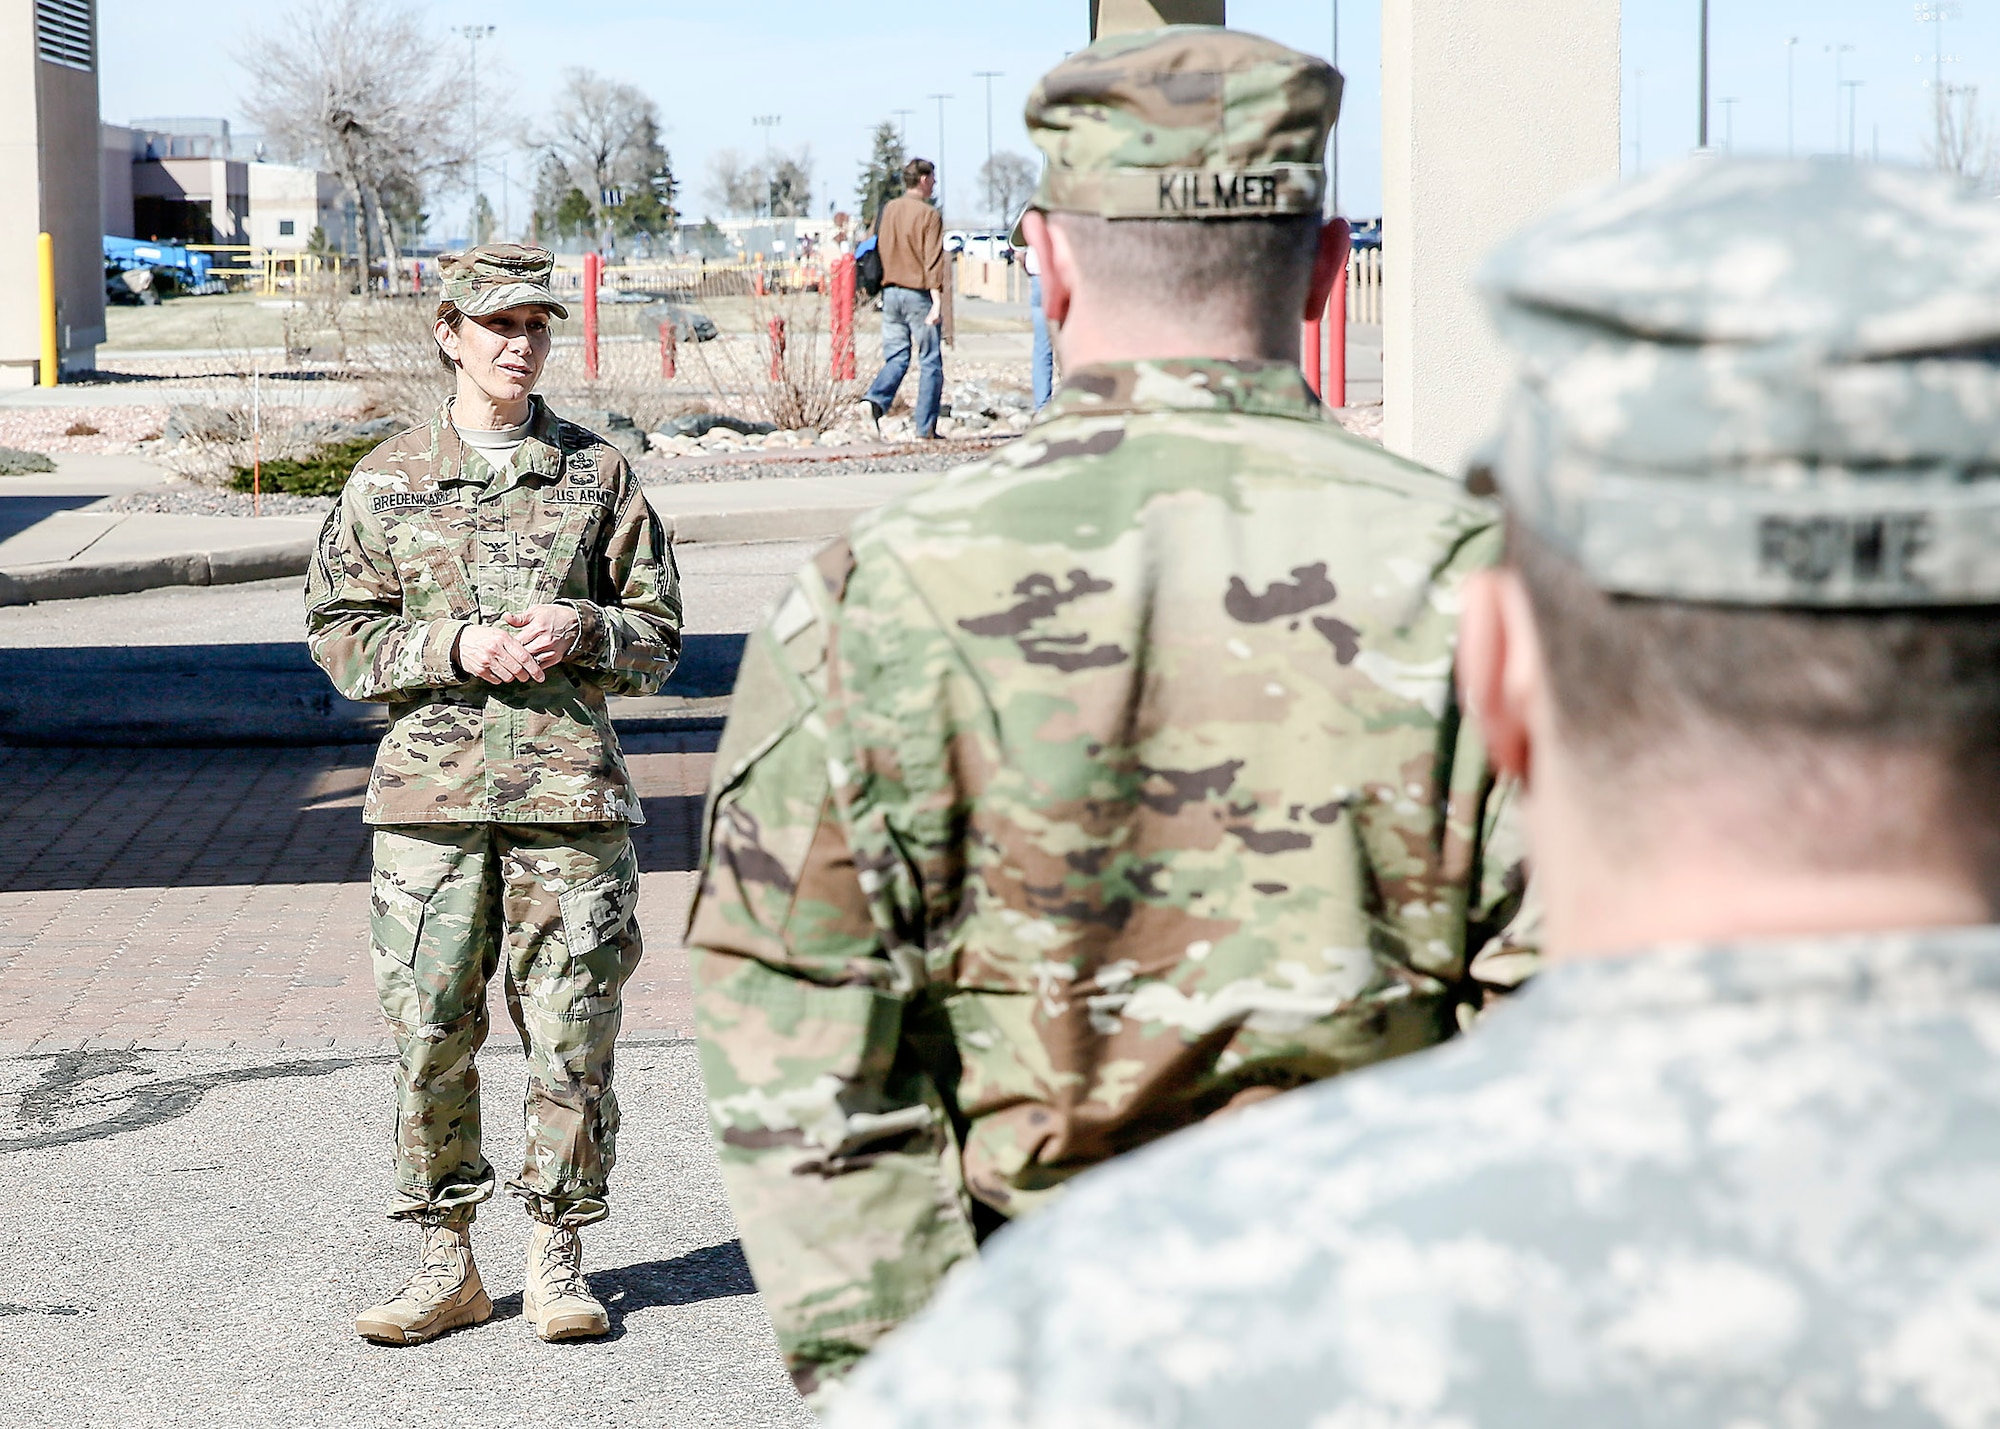 U.S. Army Col. Michele Bredenkamp, 704th Military Intelligence Battalion brigade commander, addresses the company during a Space Badge presentation ceremony March 10, 2016, at Buckley Air Force Base, Colo. The required space cadre experience for active duty Soldiers is: Basic Space Badge, 12 months; Senior Space Badge, 48 months; and Master Space Badge, 84 months, and for Reserve and National Guard Soldiers: Basic Space Badge, 24 months; Senior Space Badge, 60 months; and Master Space Badge, 96 months. (U.S. Army photo by Sgt. Kristopher Dimond/Released)